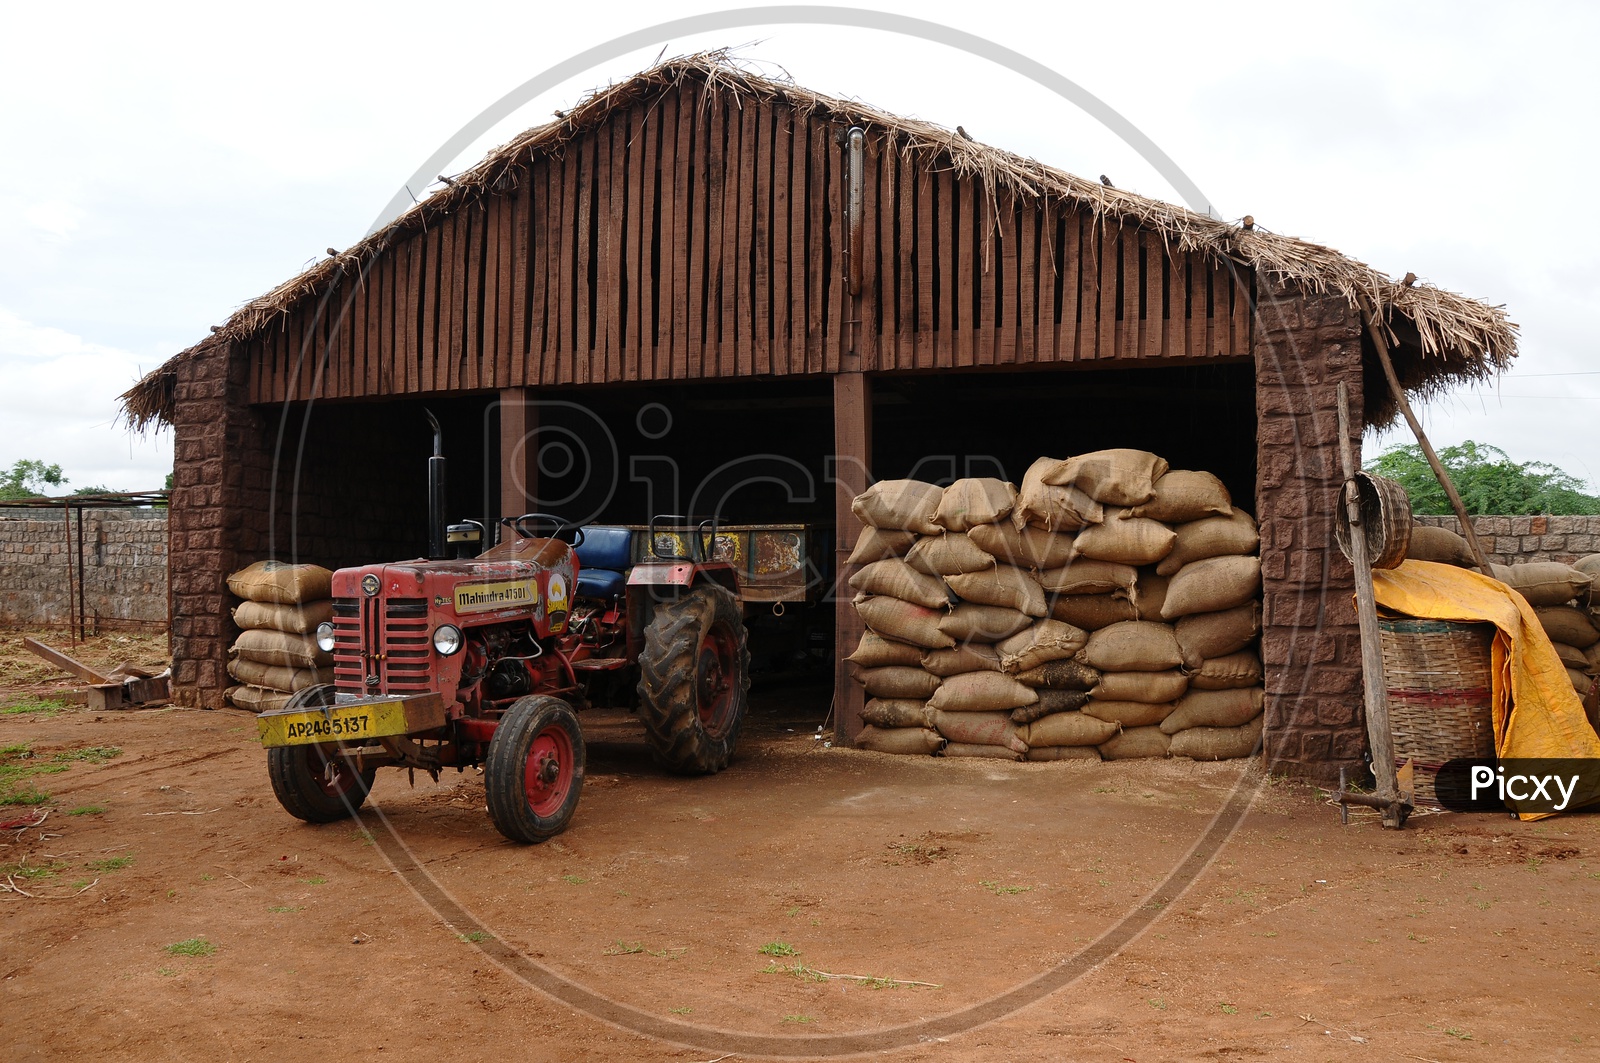 Paddy Storage Shelter With Paddy Bags And Tractor  in Rural Village Houses